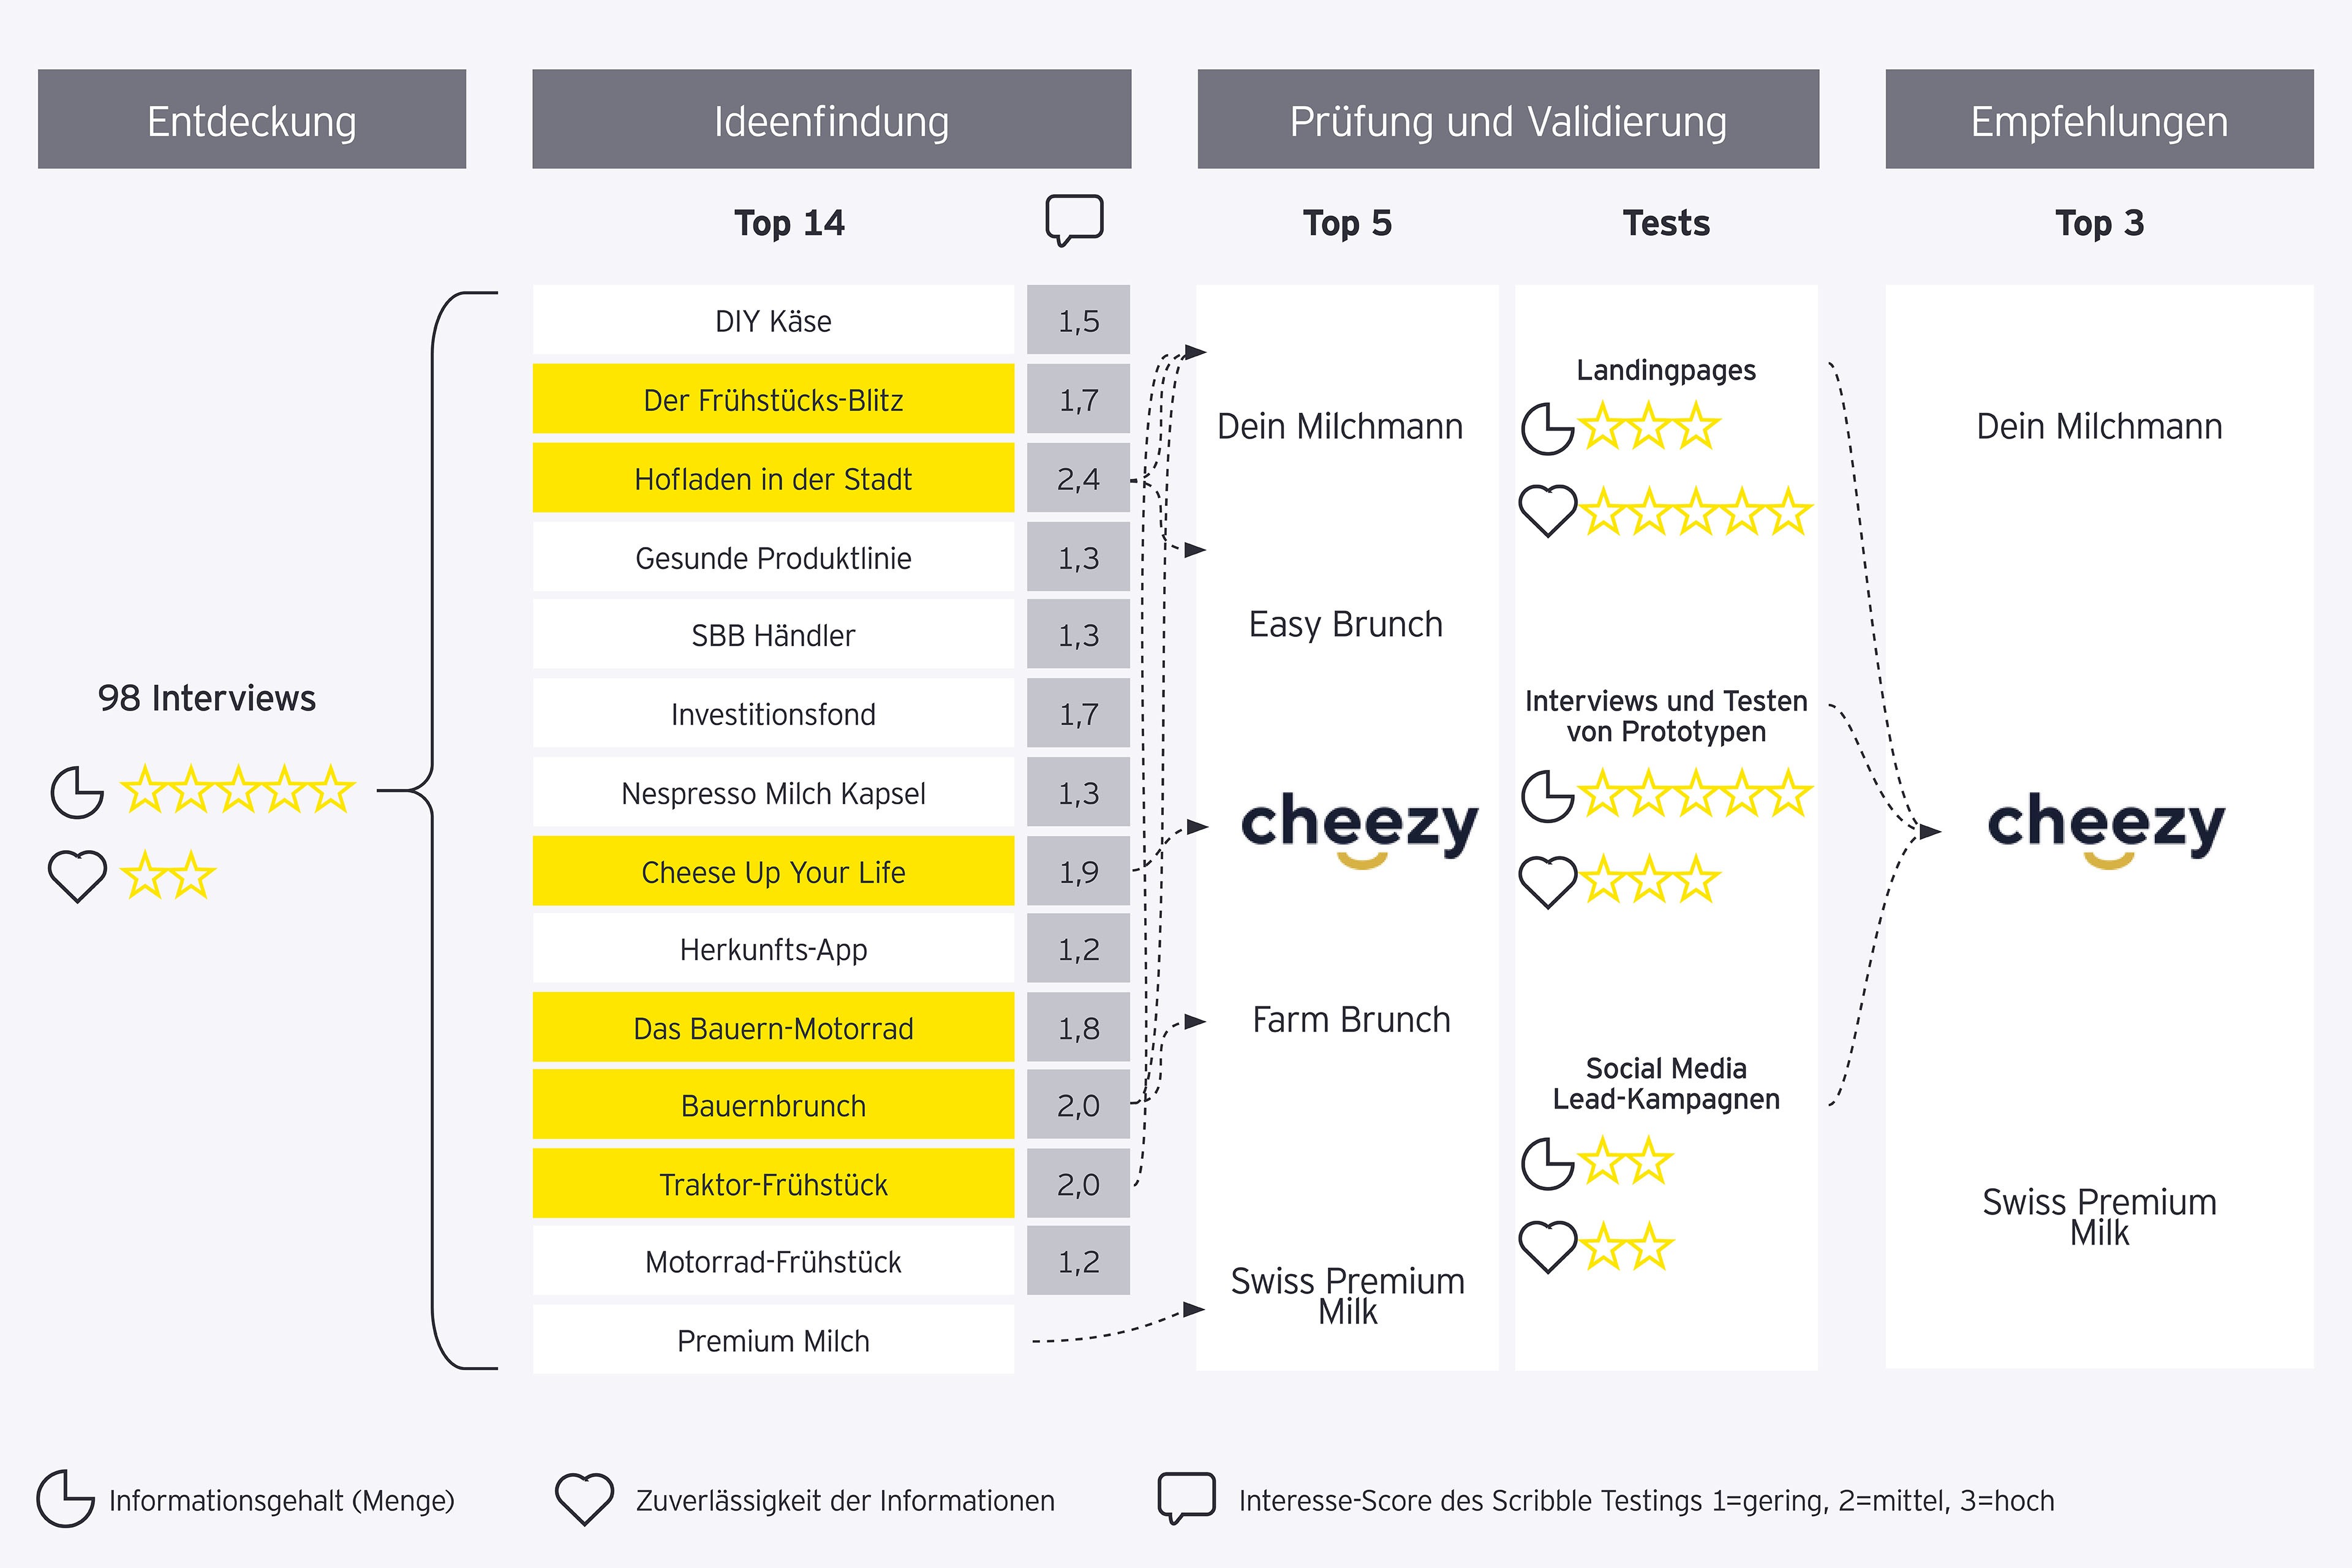 EY’s research and testing process